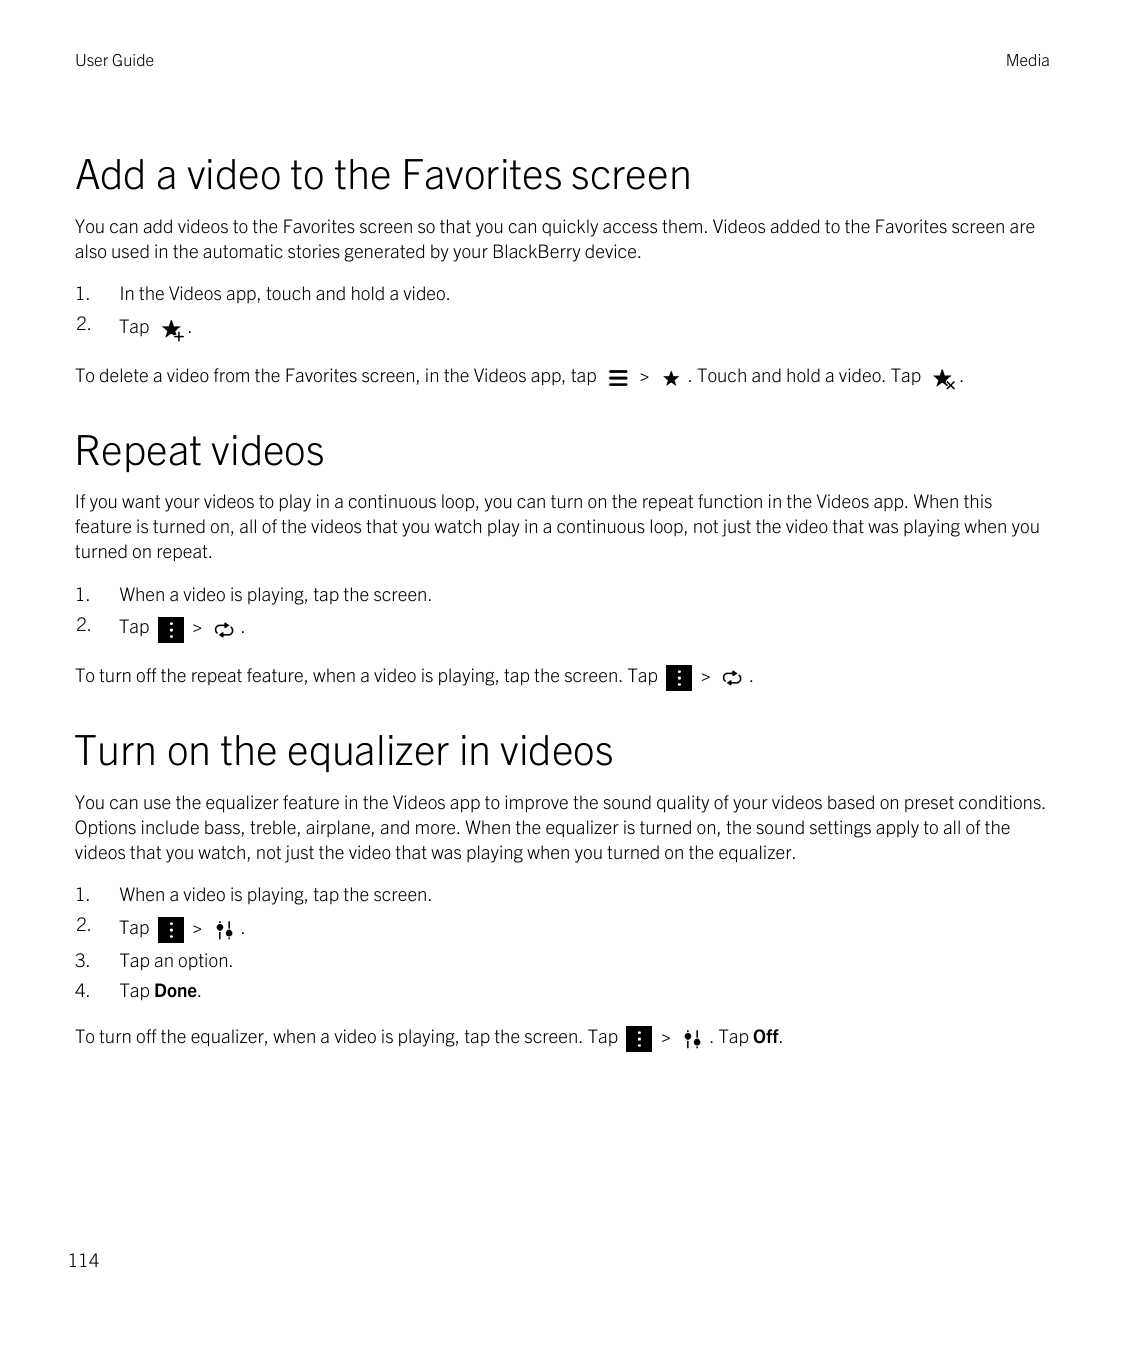 User GuideMediaAdd a video to the Favorites screenYou can add videos to the Favorites screen so that you can quickly access them